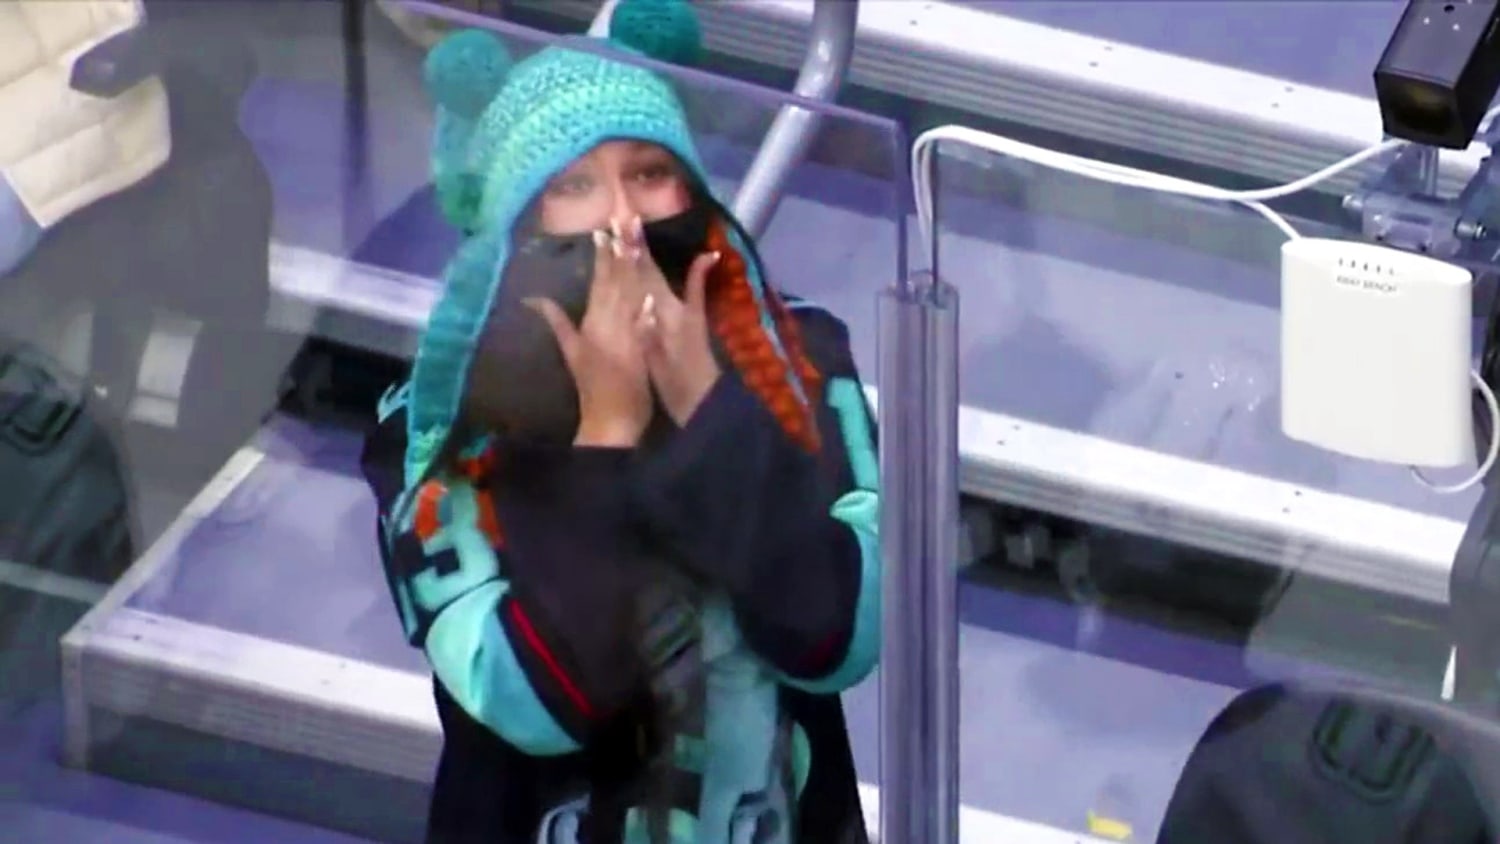 Hockey Fan Spots Cancerous Mole at Game and Delivers a Lifesaving